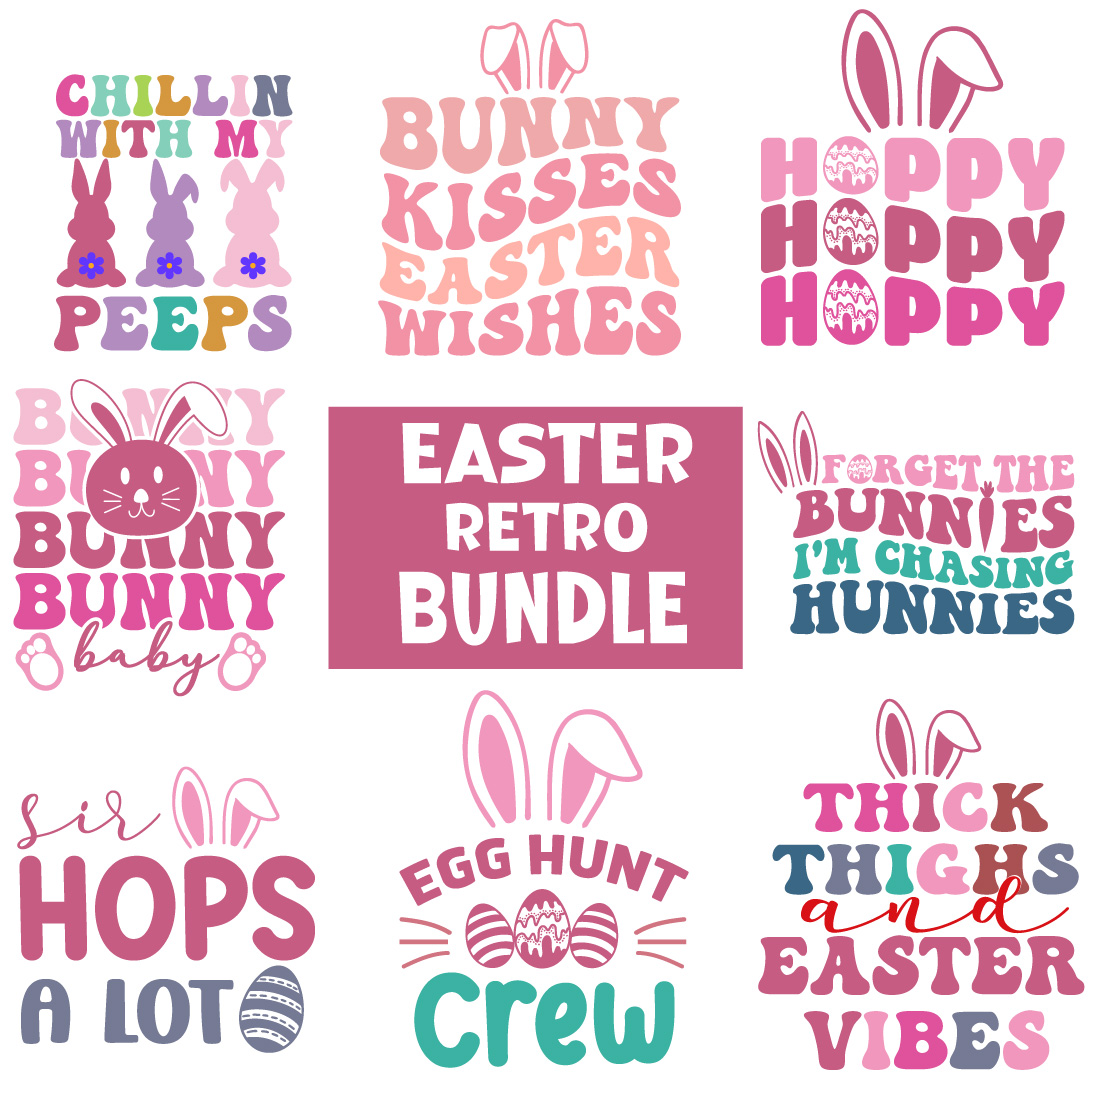 Happy Easter Svg,Png,Bunny Svg,Retro Easter Svg,Easter Quotes,Spring Svg,Easter Shirt Svg,Easter Gift Svg,Funny Easter Svg,Bunny Day, Egg for Kids,Cut Files,Retro Groovy cover image.